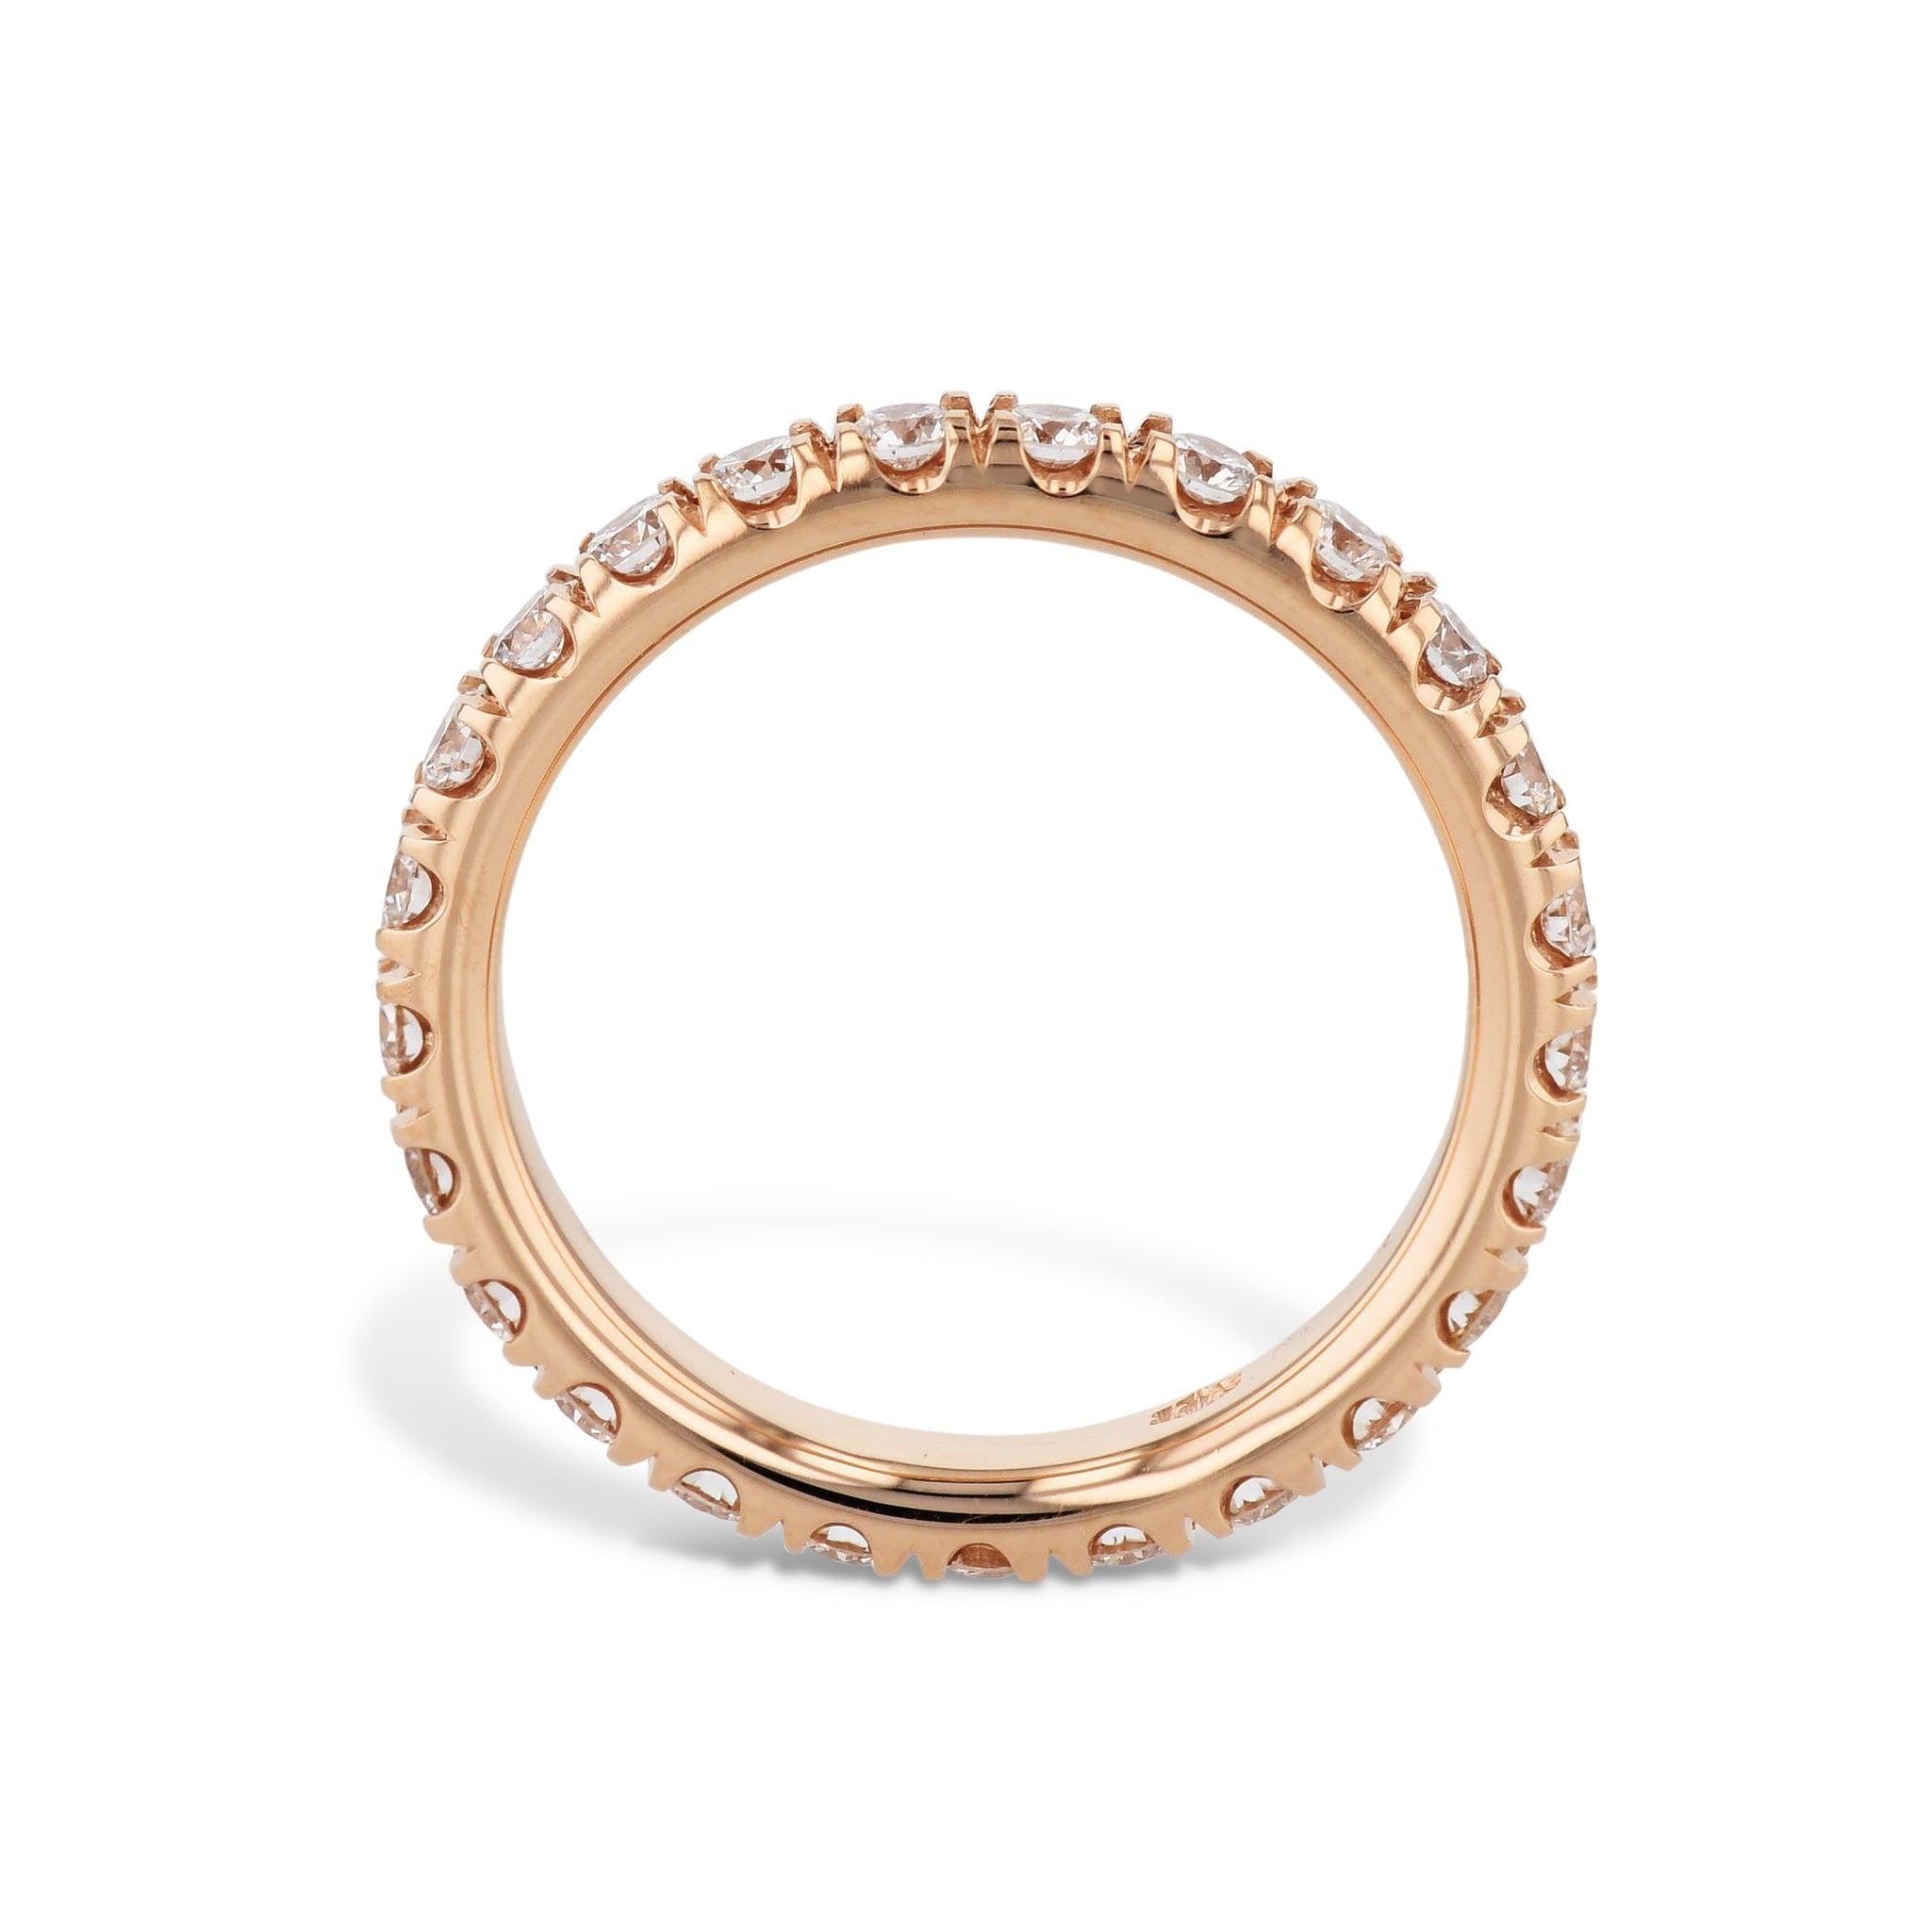 Lustrous 18kt Rose Gold graciously holds 25 captivating Round Cut Diamonds. Each diamond encased in a timeless 3mm eternity band, lovingly crafted as a work of art by H&H Jewels. Allow this breathtaking Eternity Band Ring to mesmerize your finger in